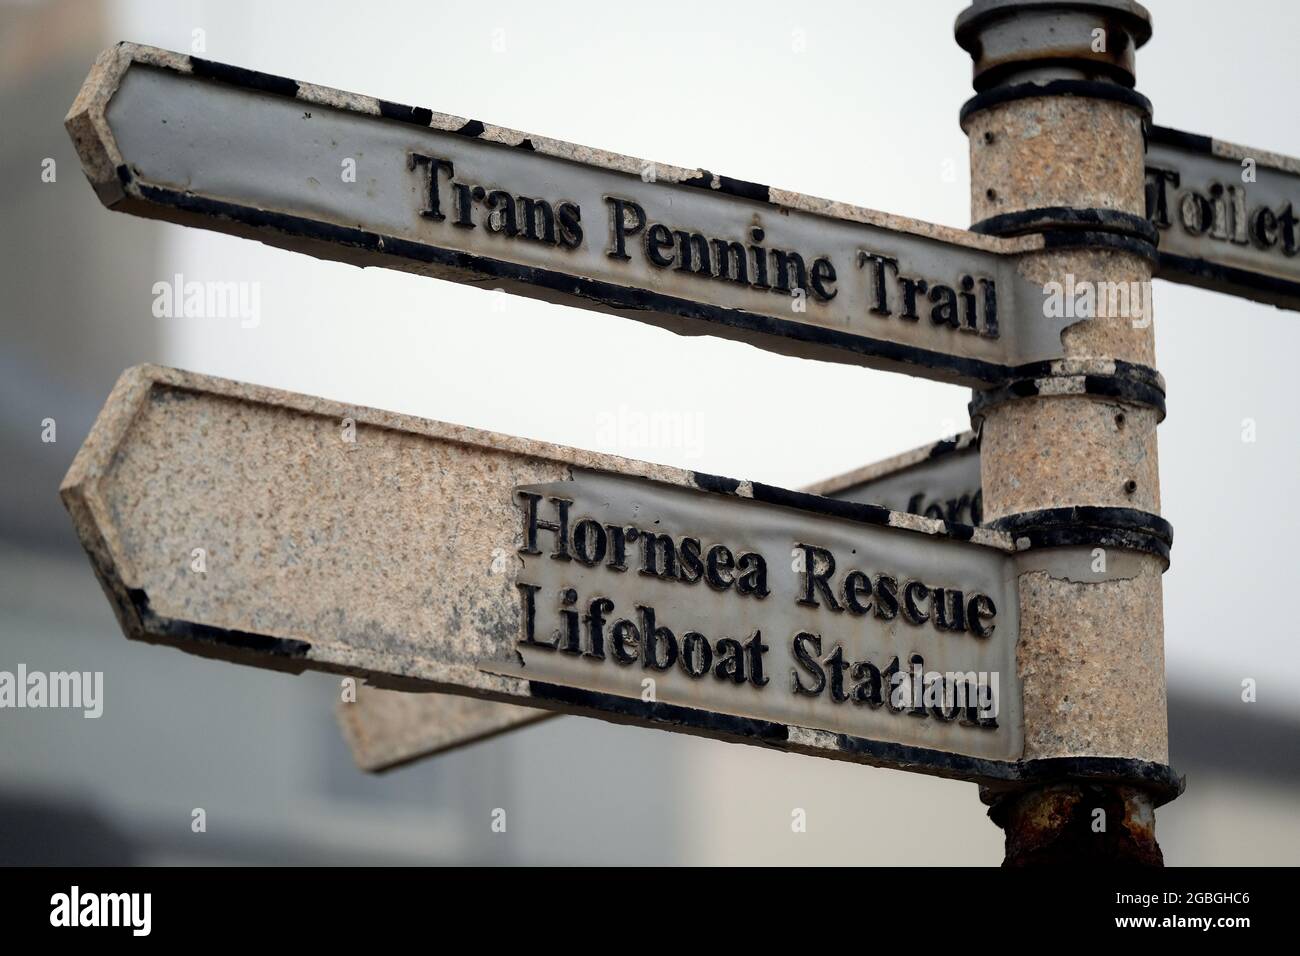 Old sign on Hornsea, Yorkshire, sea front indicating start of trans penine way. Stock Photo